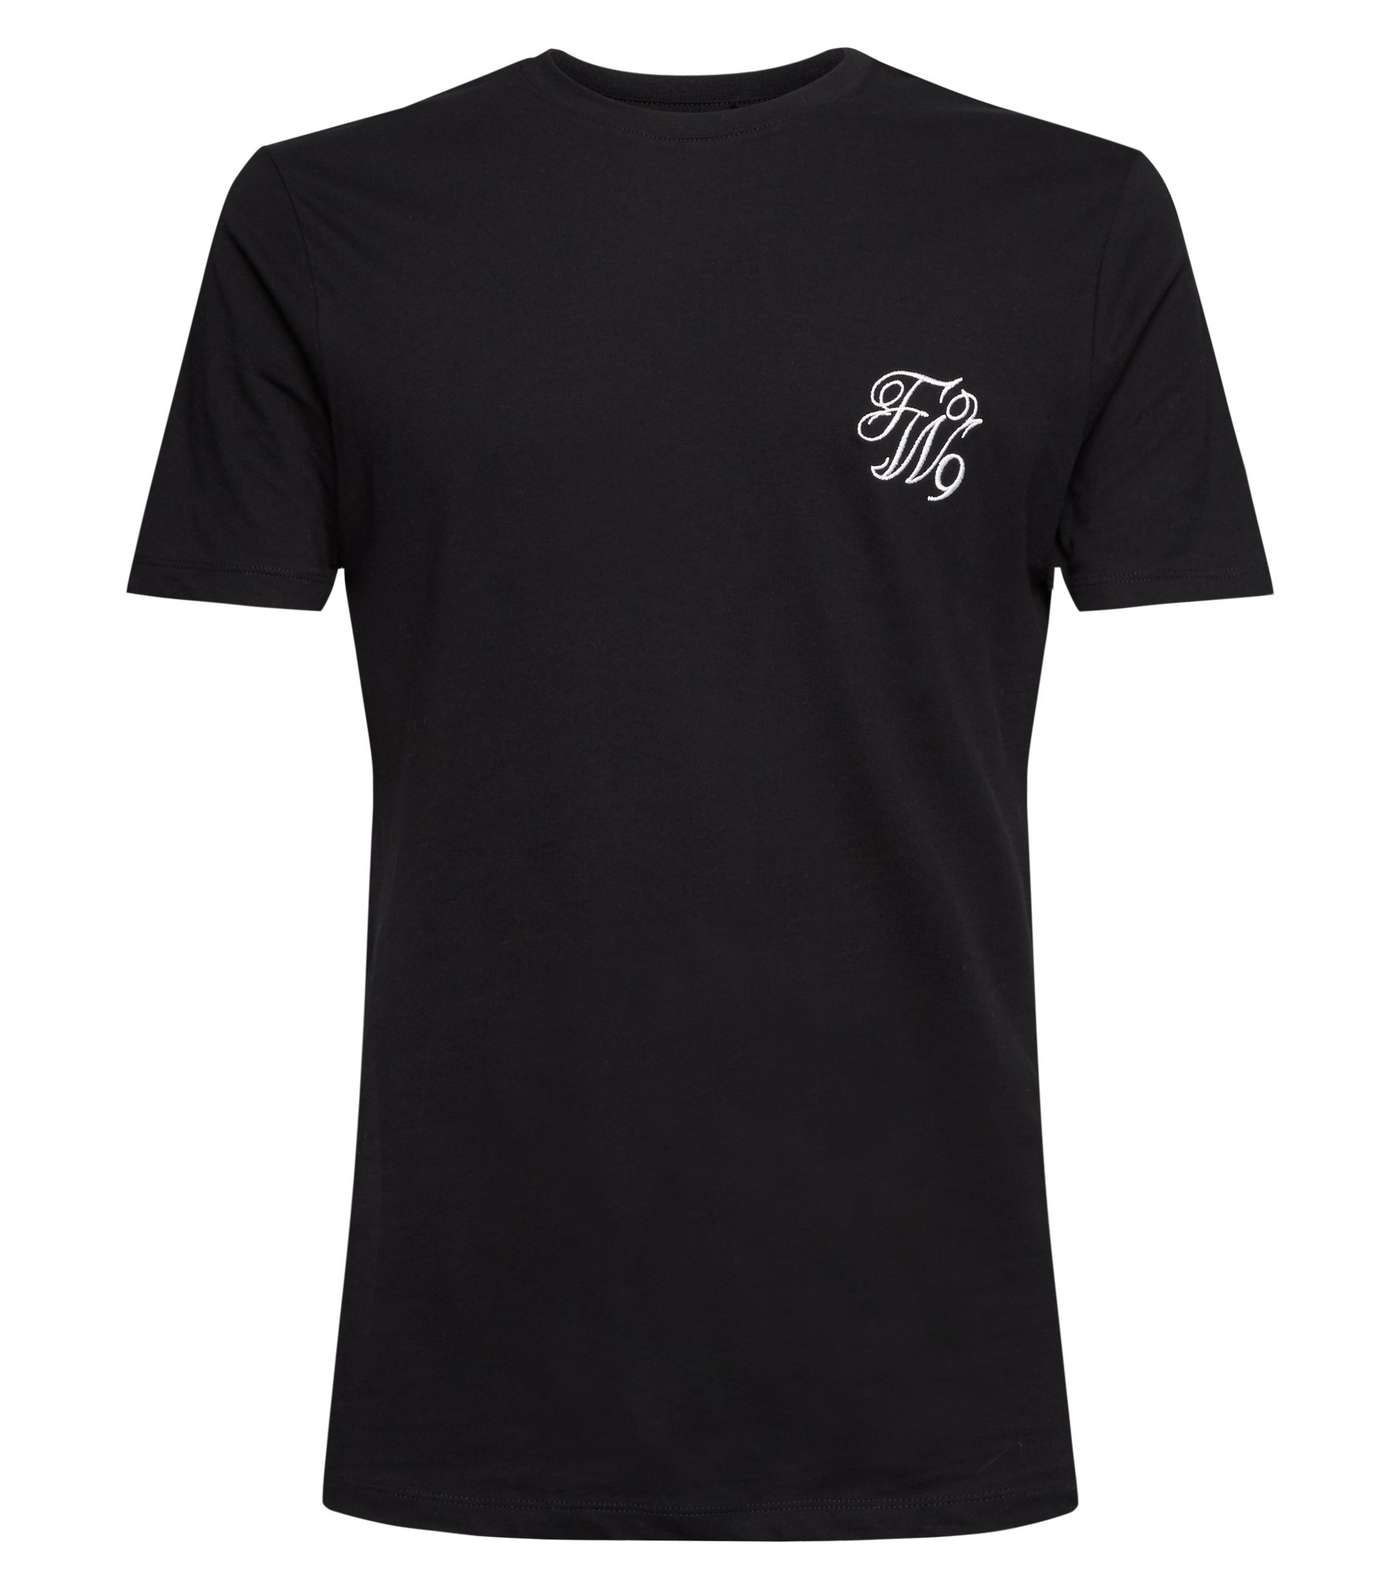 Black TW9 Embroidered Muscle Fit T-Shirt Image 4